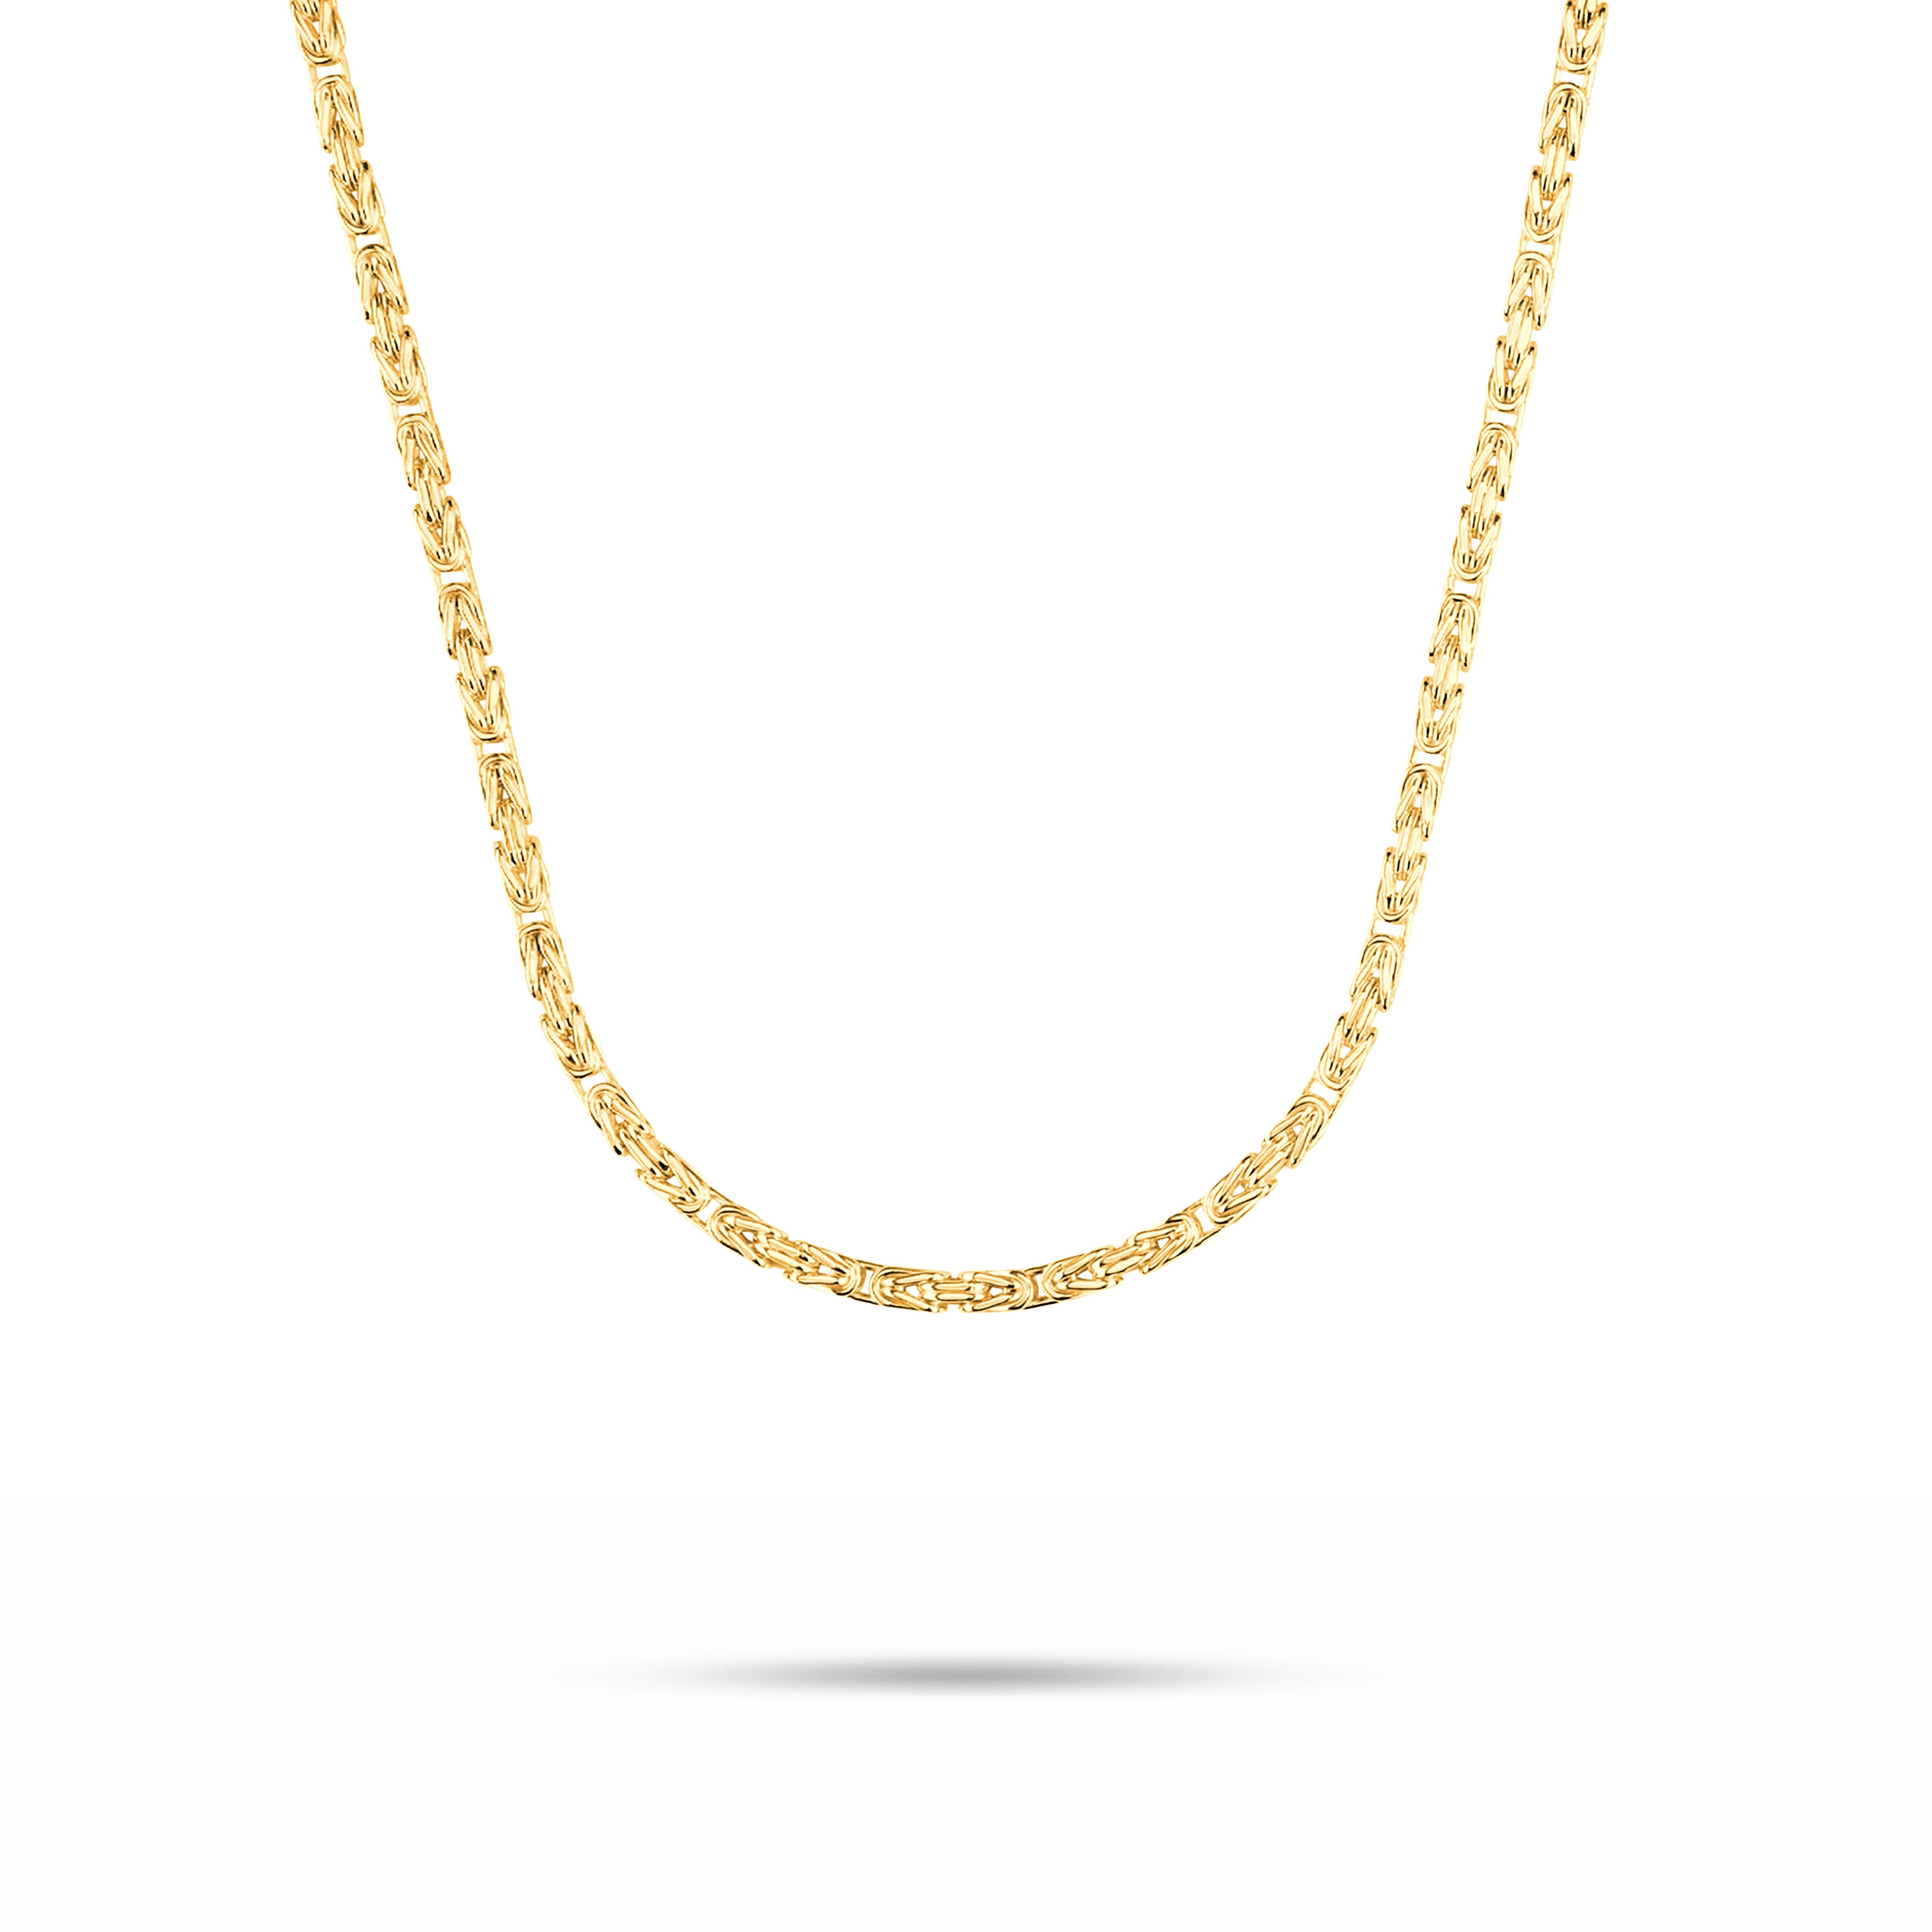 Byzantine chain 2.9mm wide - 585 gold - solid